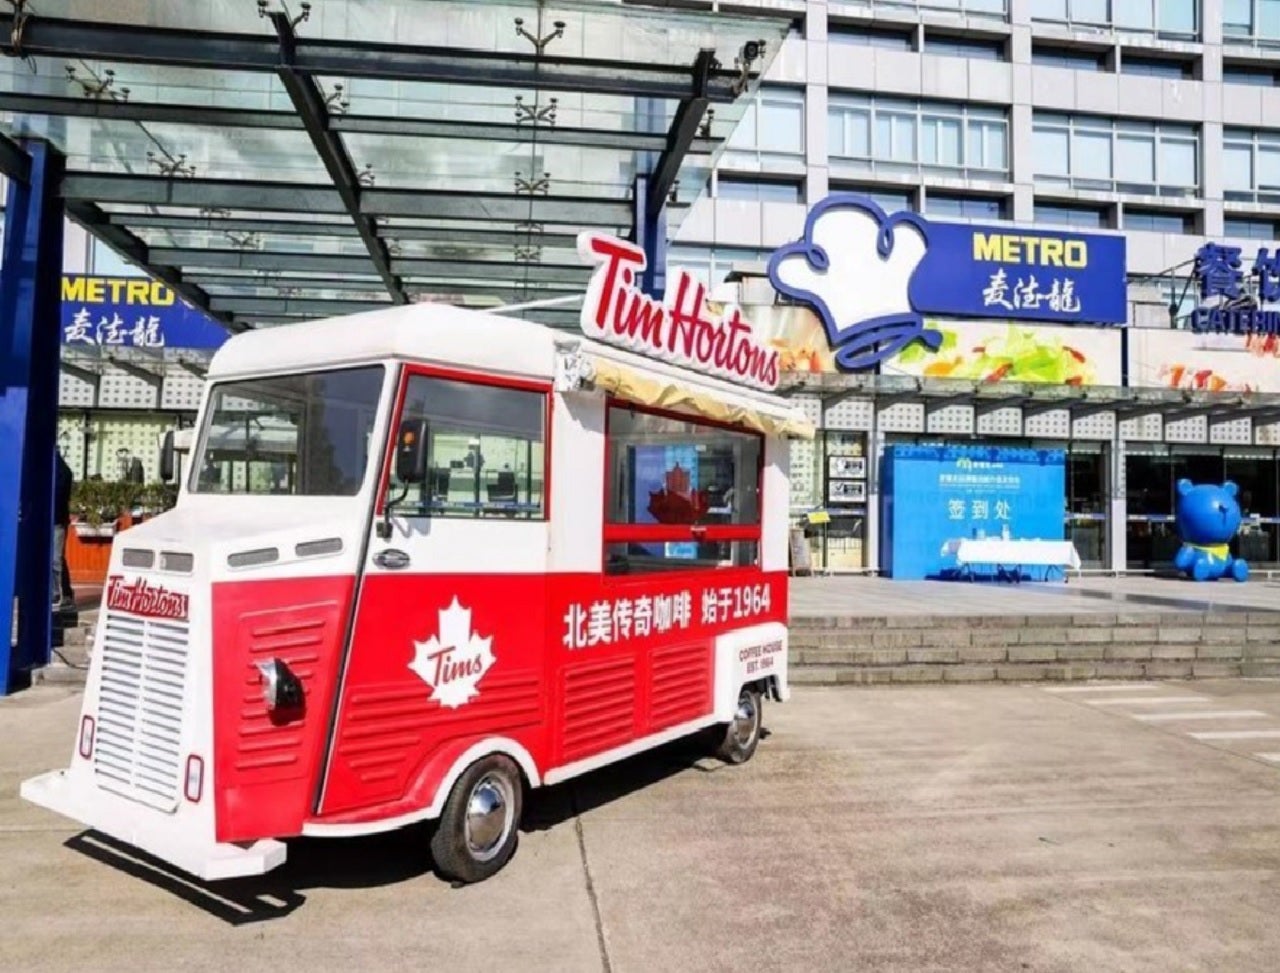 Tims China partners with Metro China to expand footprint